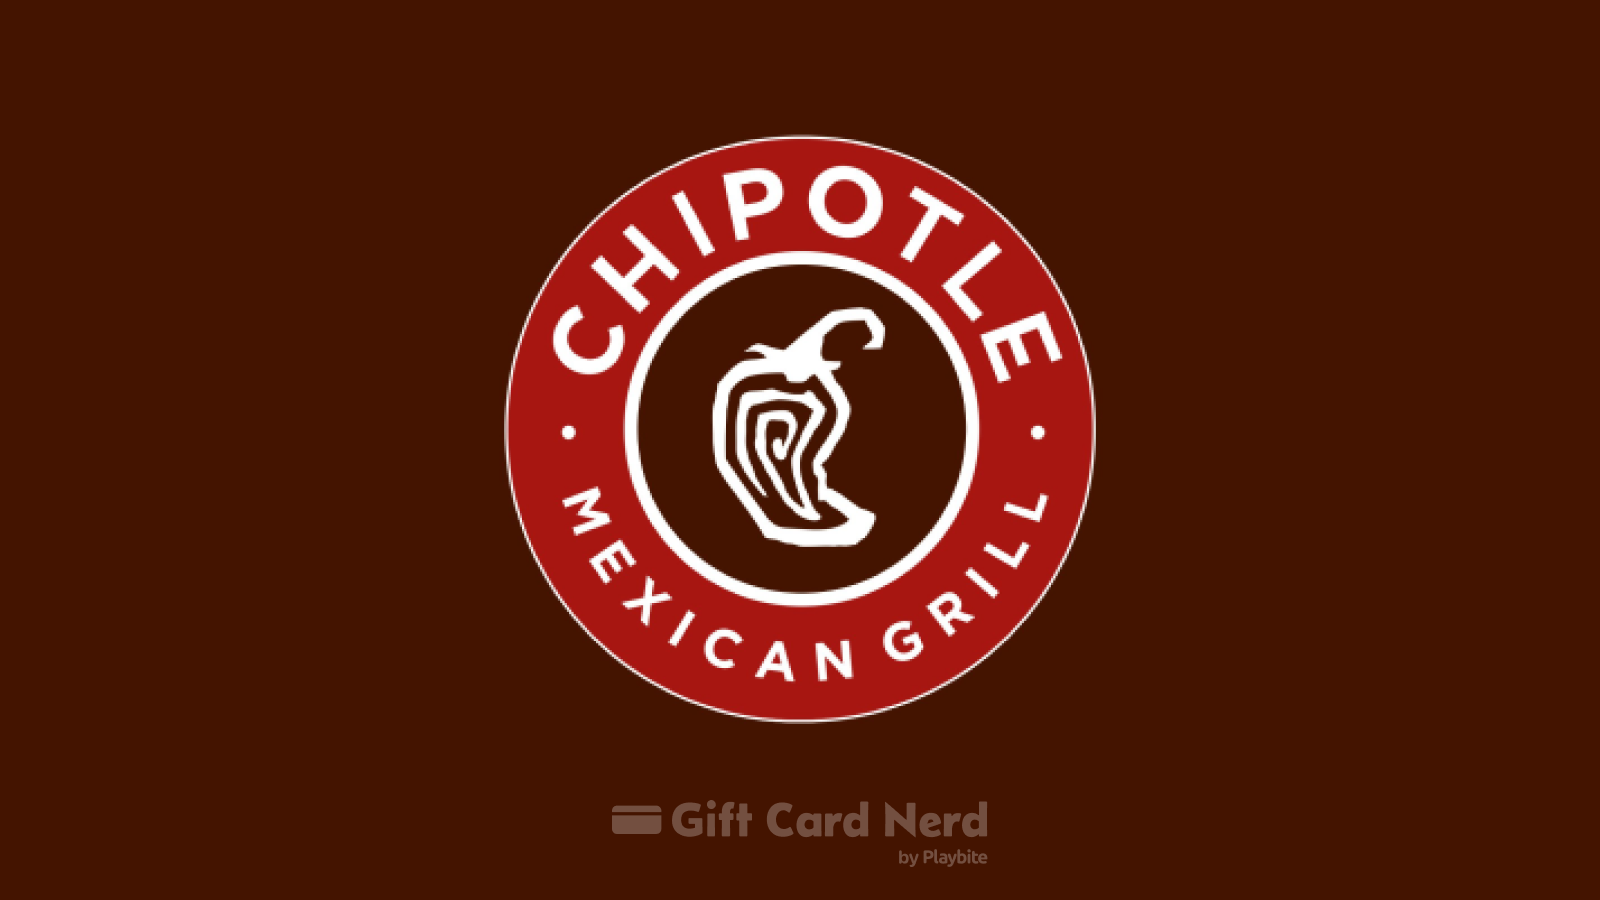 Can You Buy Chipotle Gift Cards at CVS?